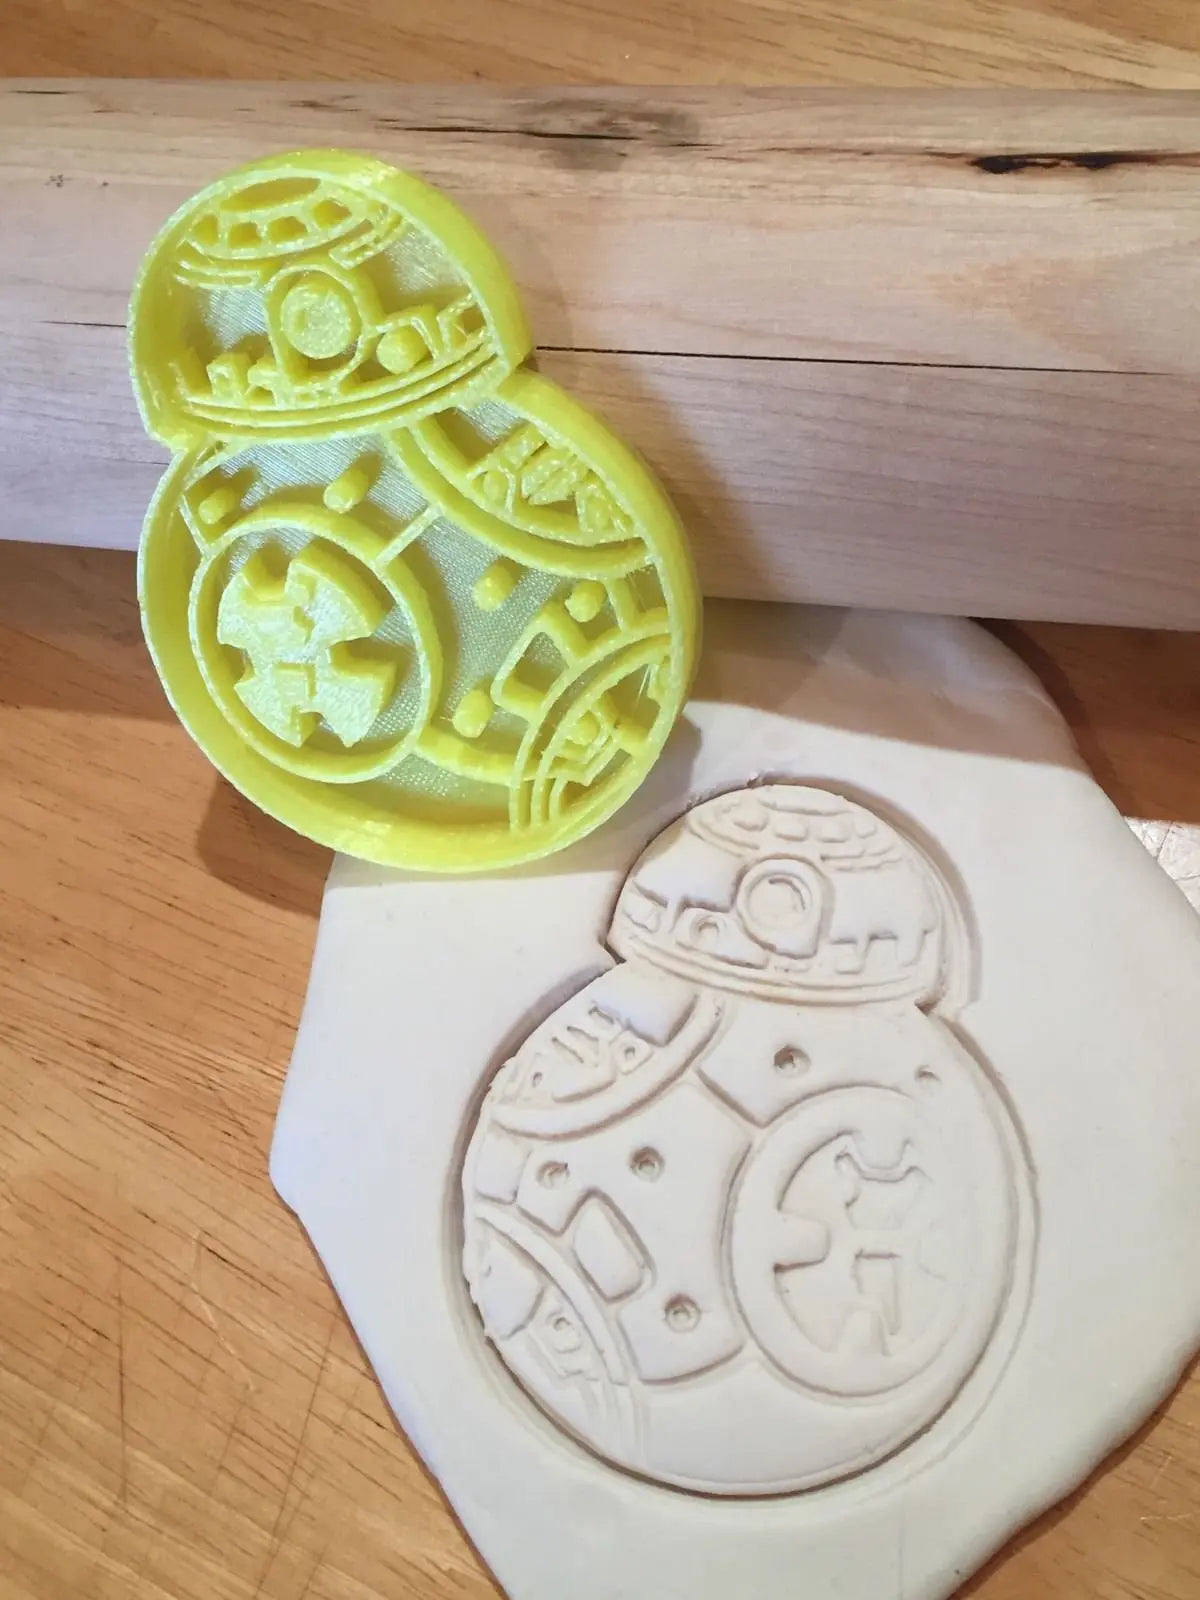 BB-8 Star wars-inspired Cookie cutter MEG cookie cutters